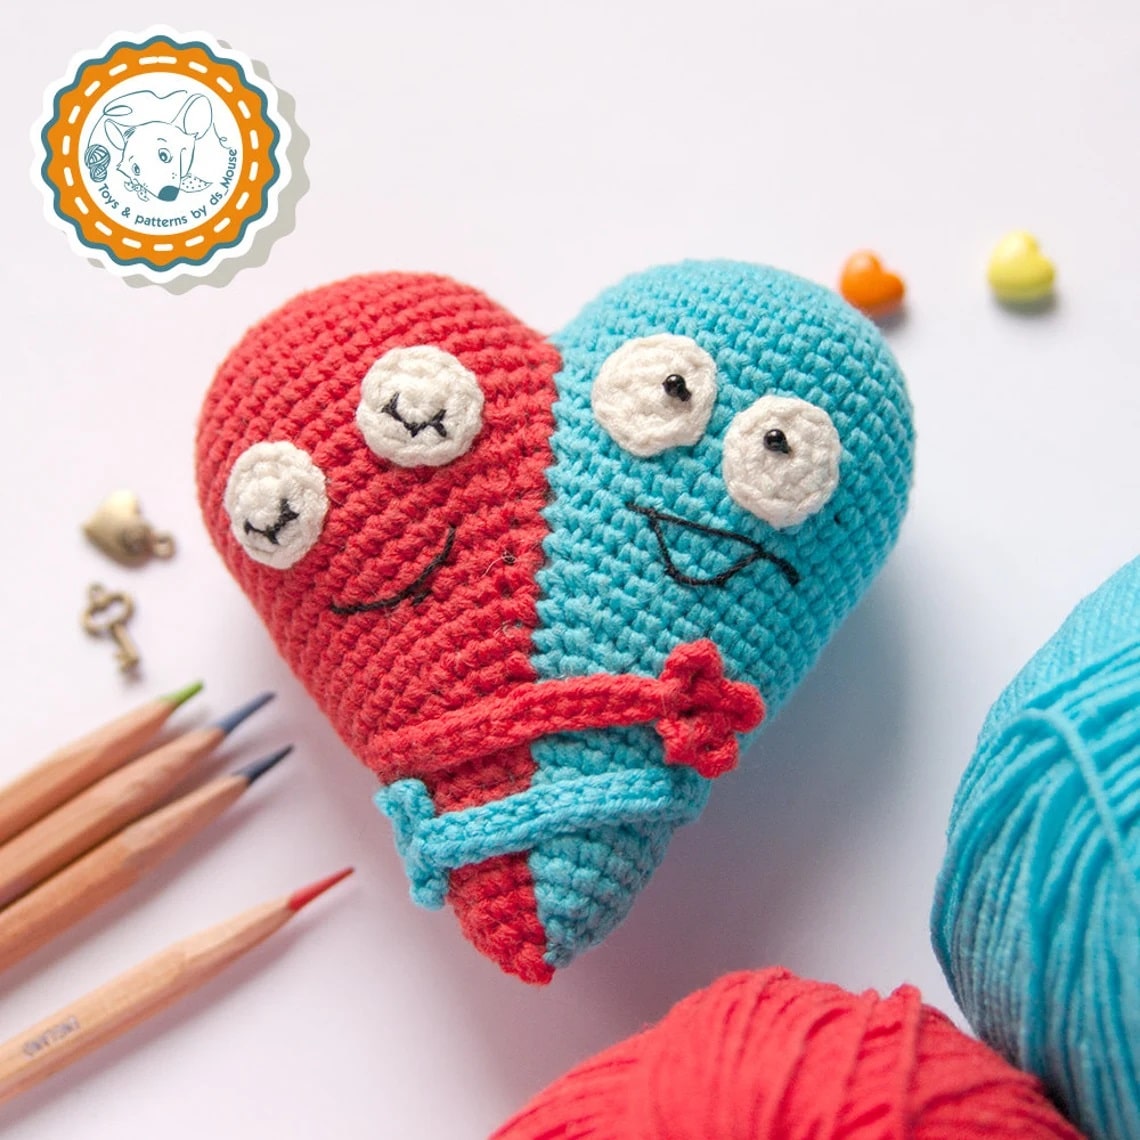  Half a red crochet heart and blue heart stitched together with hands wrapped around hugging and black eyes and mouths stitched on.